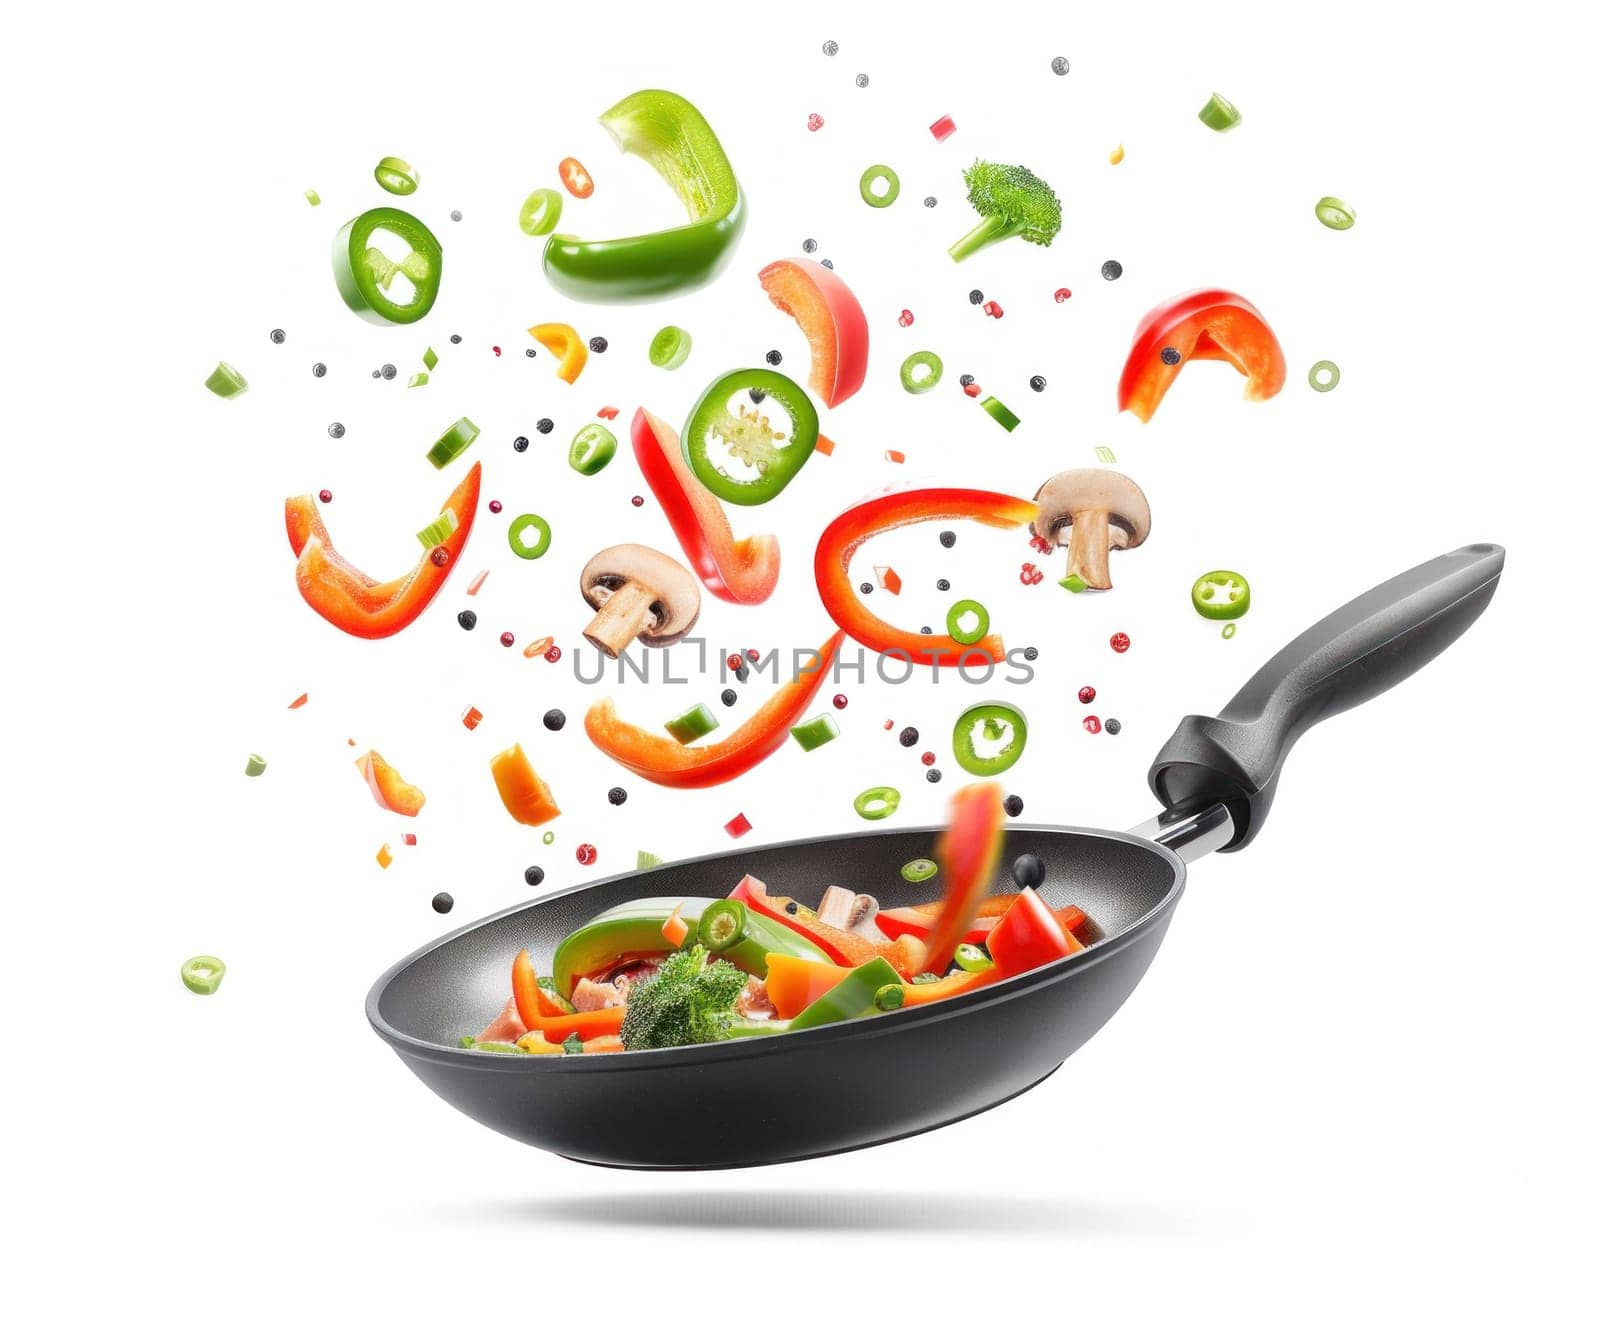 Flying vegetables in frying pan on white background illustration of healthy cooking concept